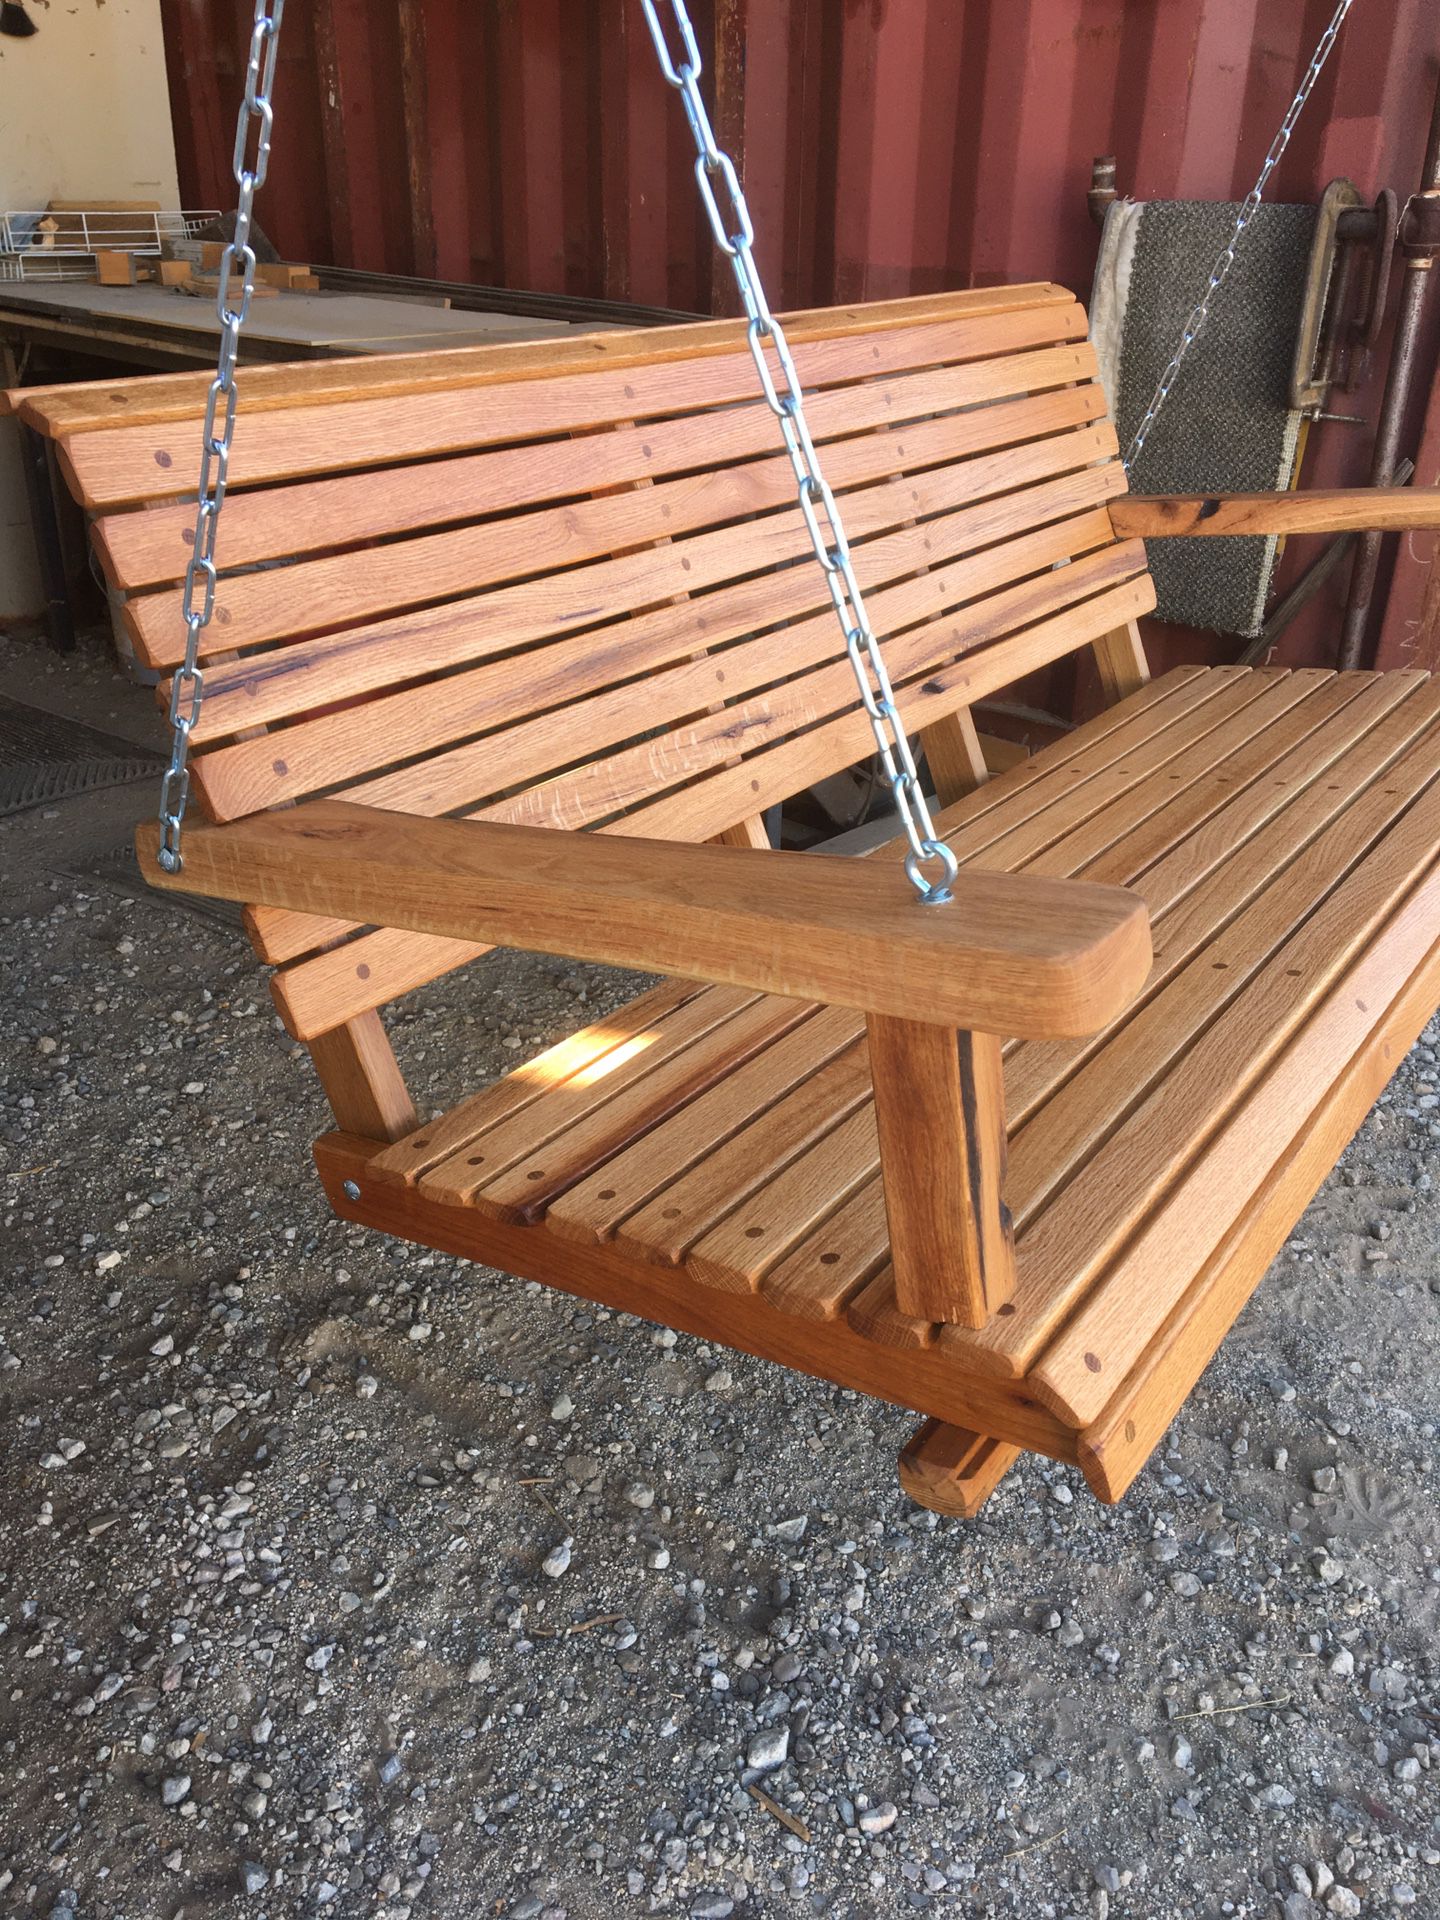 RED OAK PORCH SWINGS 54” Wide. With Chain, Natural Oil Finish. $380